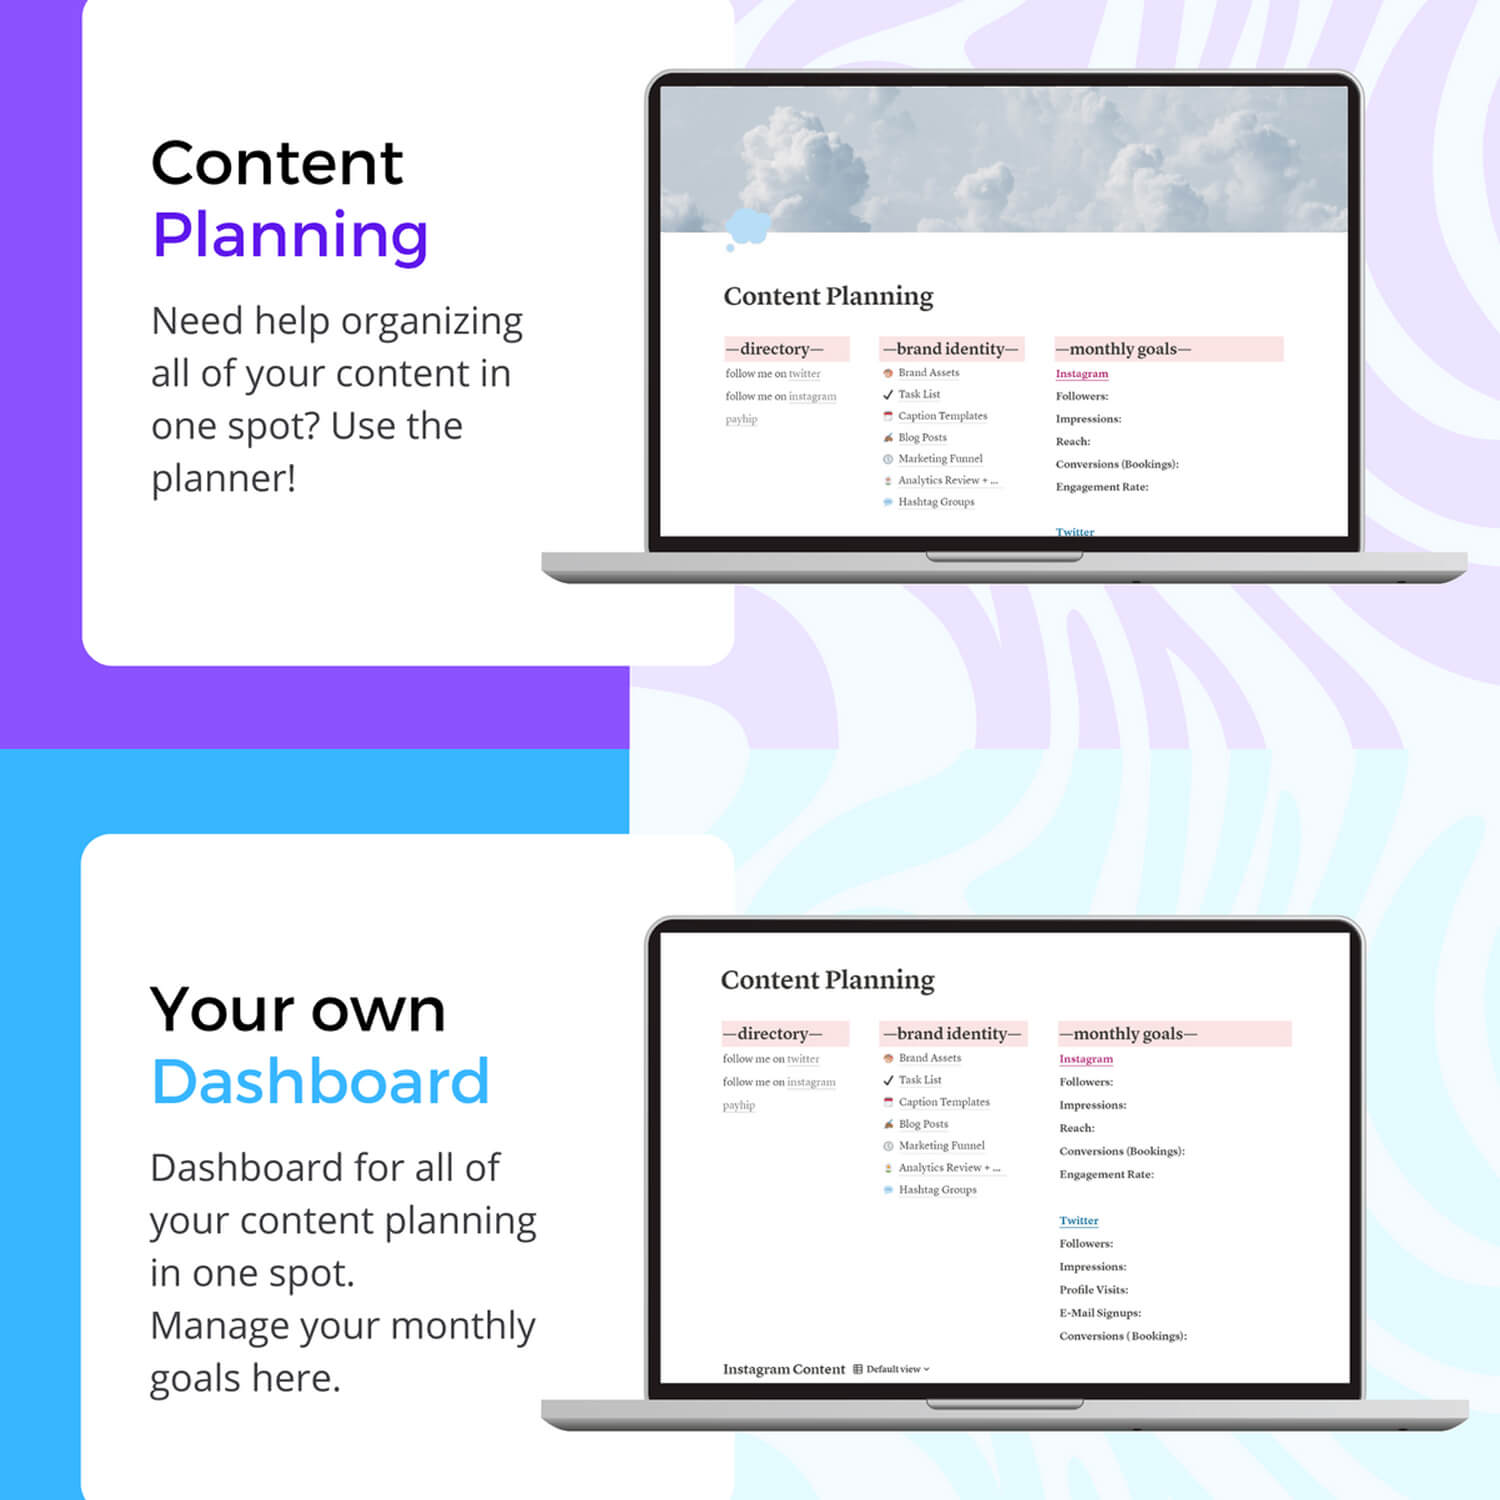 Content planning helps organizing all of your content in one spot.